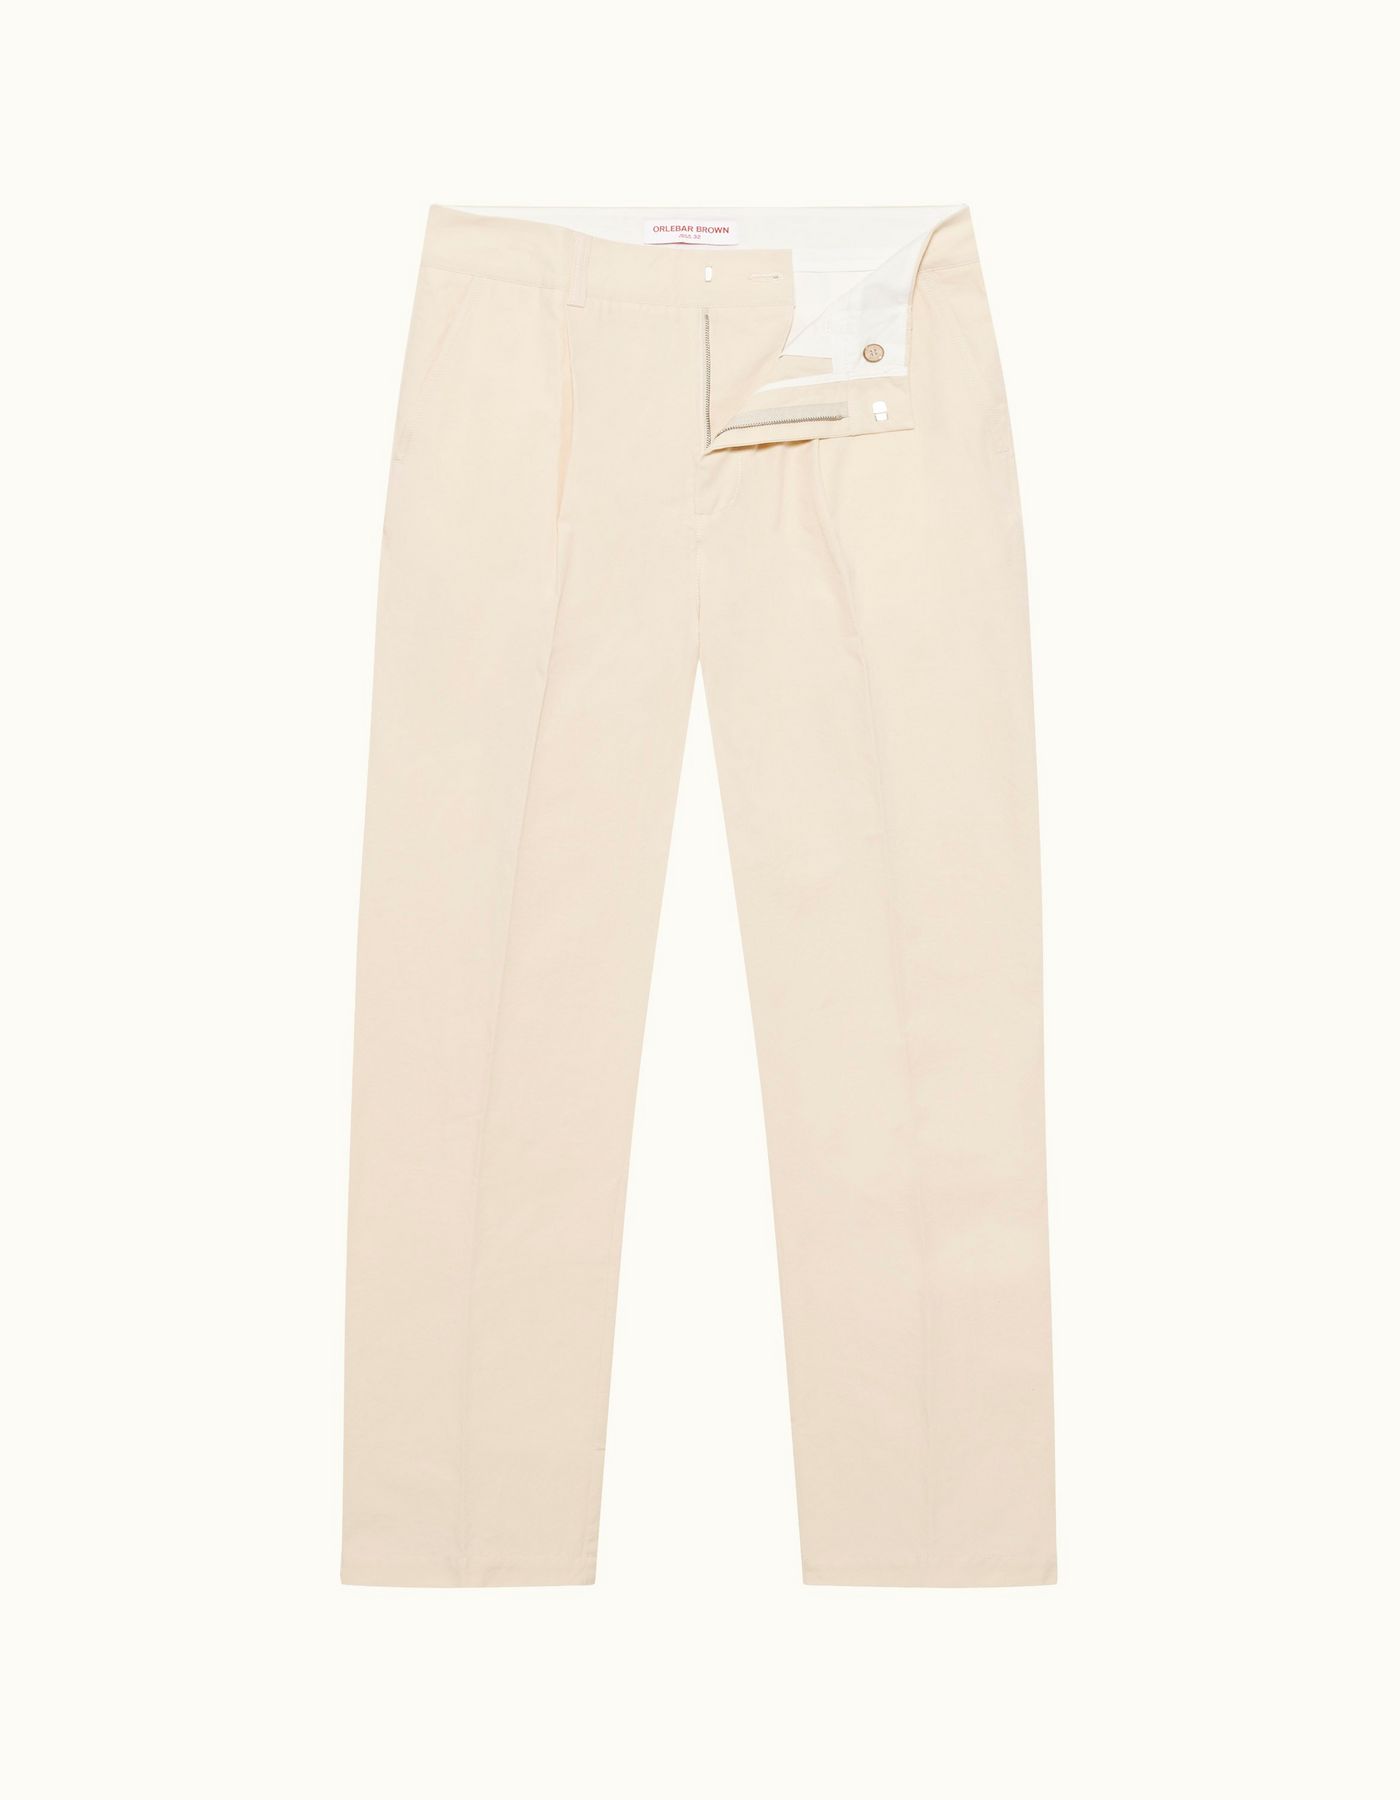 Beckworth - Mens White Sand Relaxed Fit Laundered Cotton Canvas Trousers